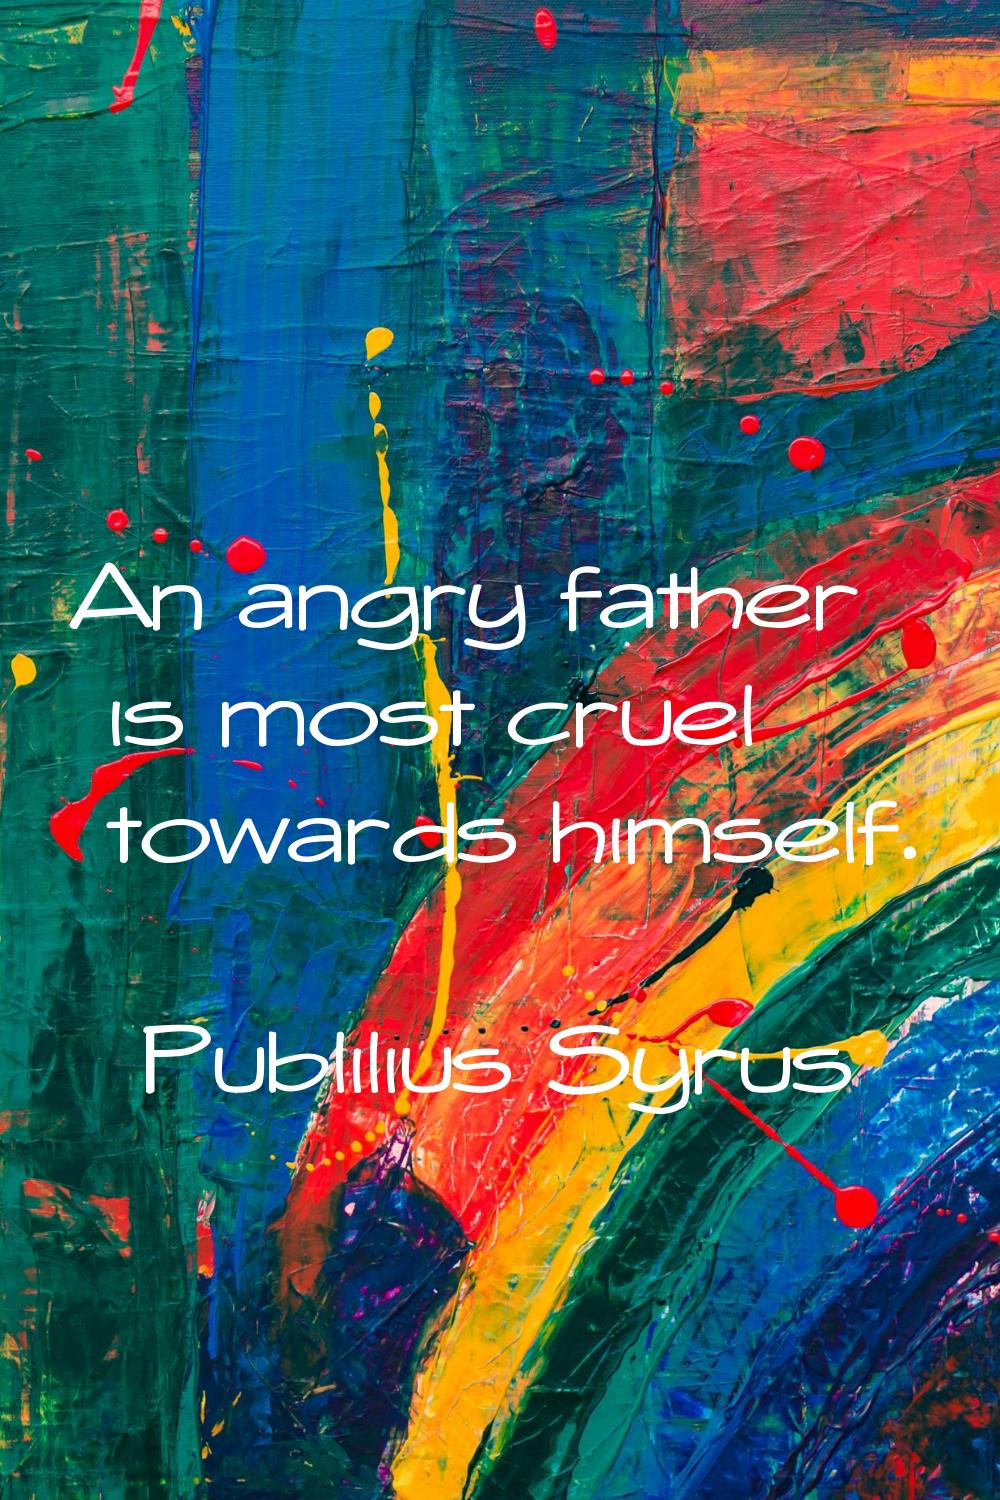 An angry father is most cruel towards himself.